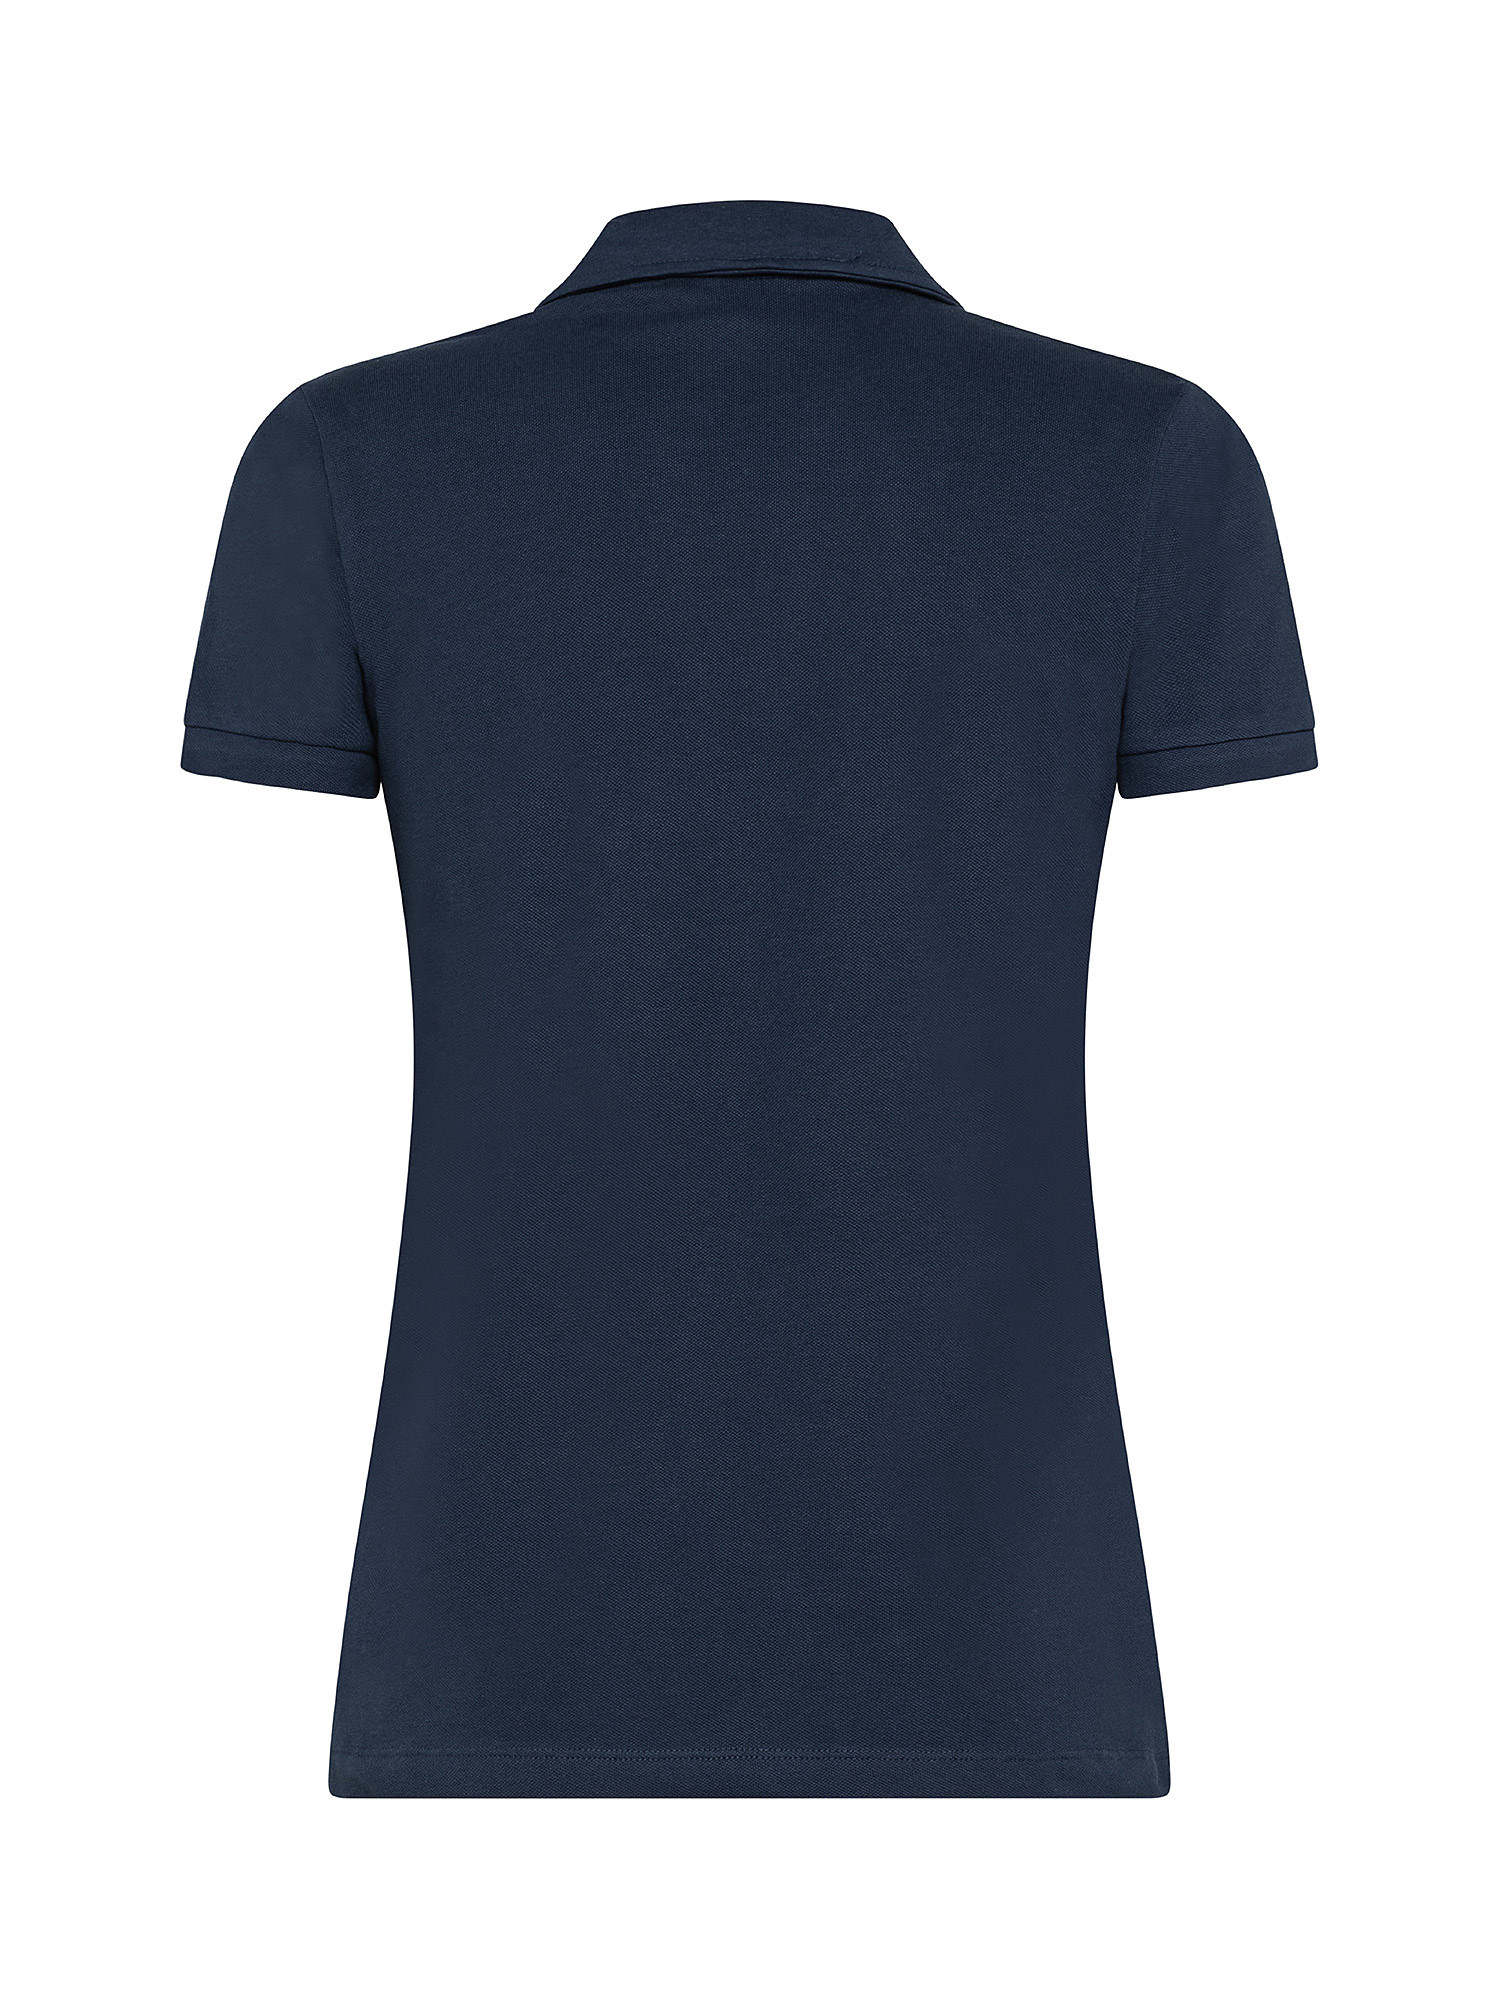 Polo shirt with rouches, Dark Blue, large image number 1